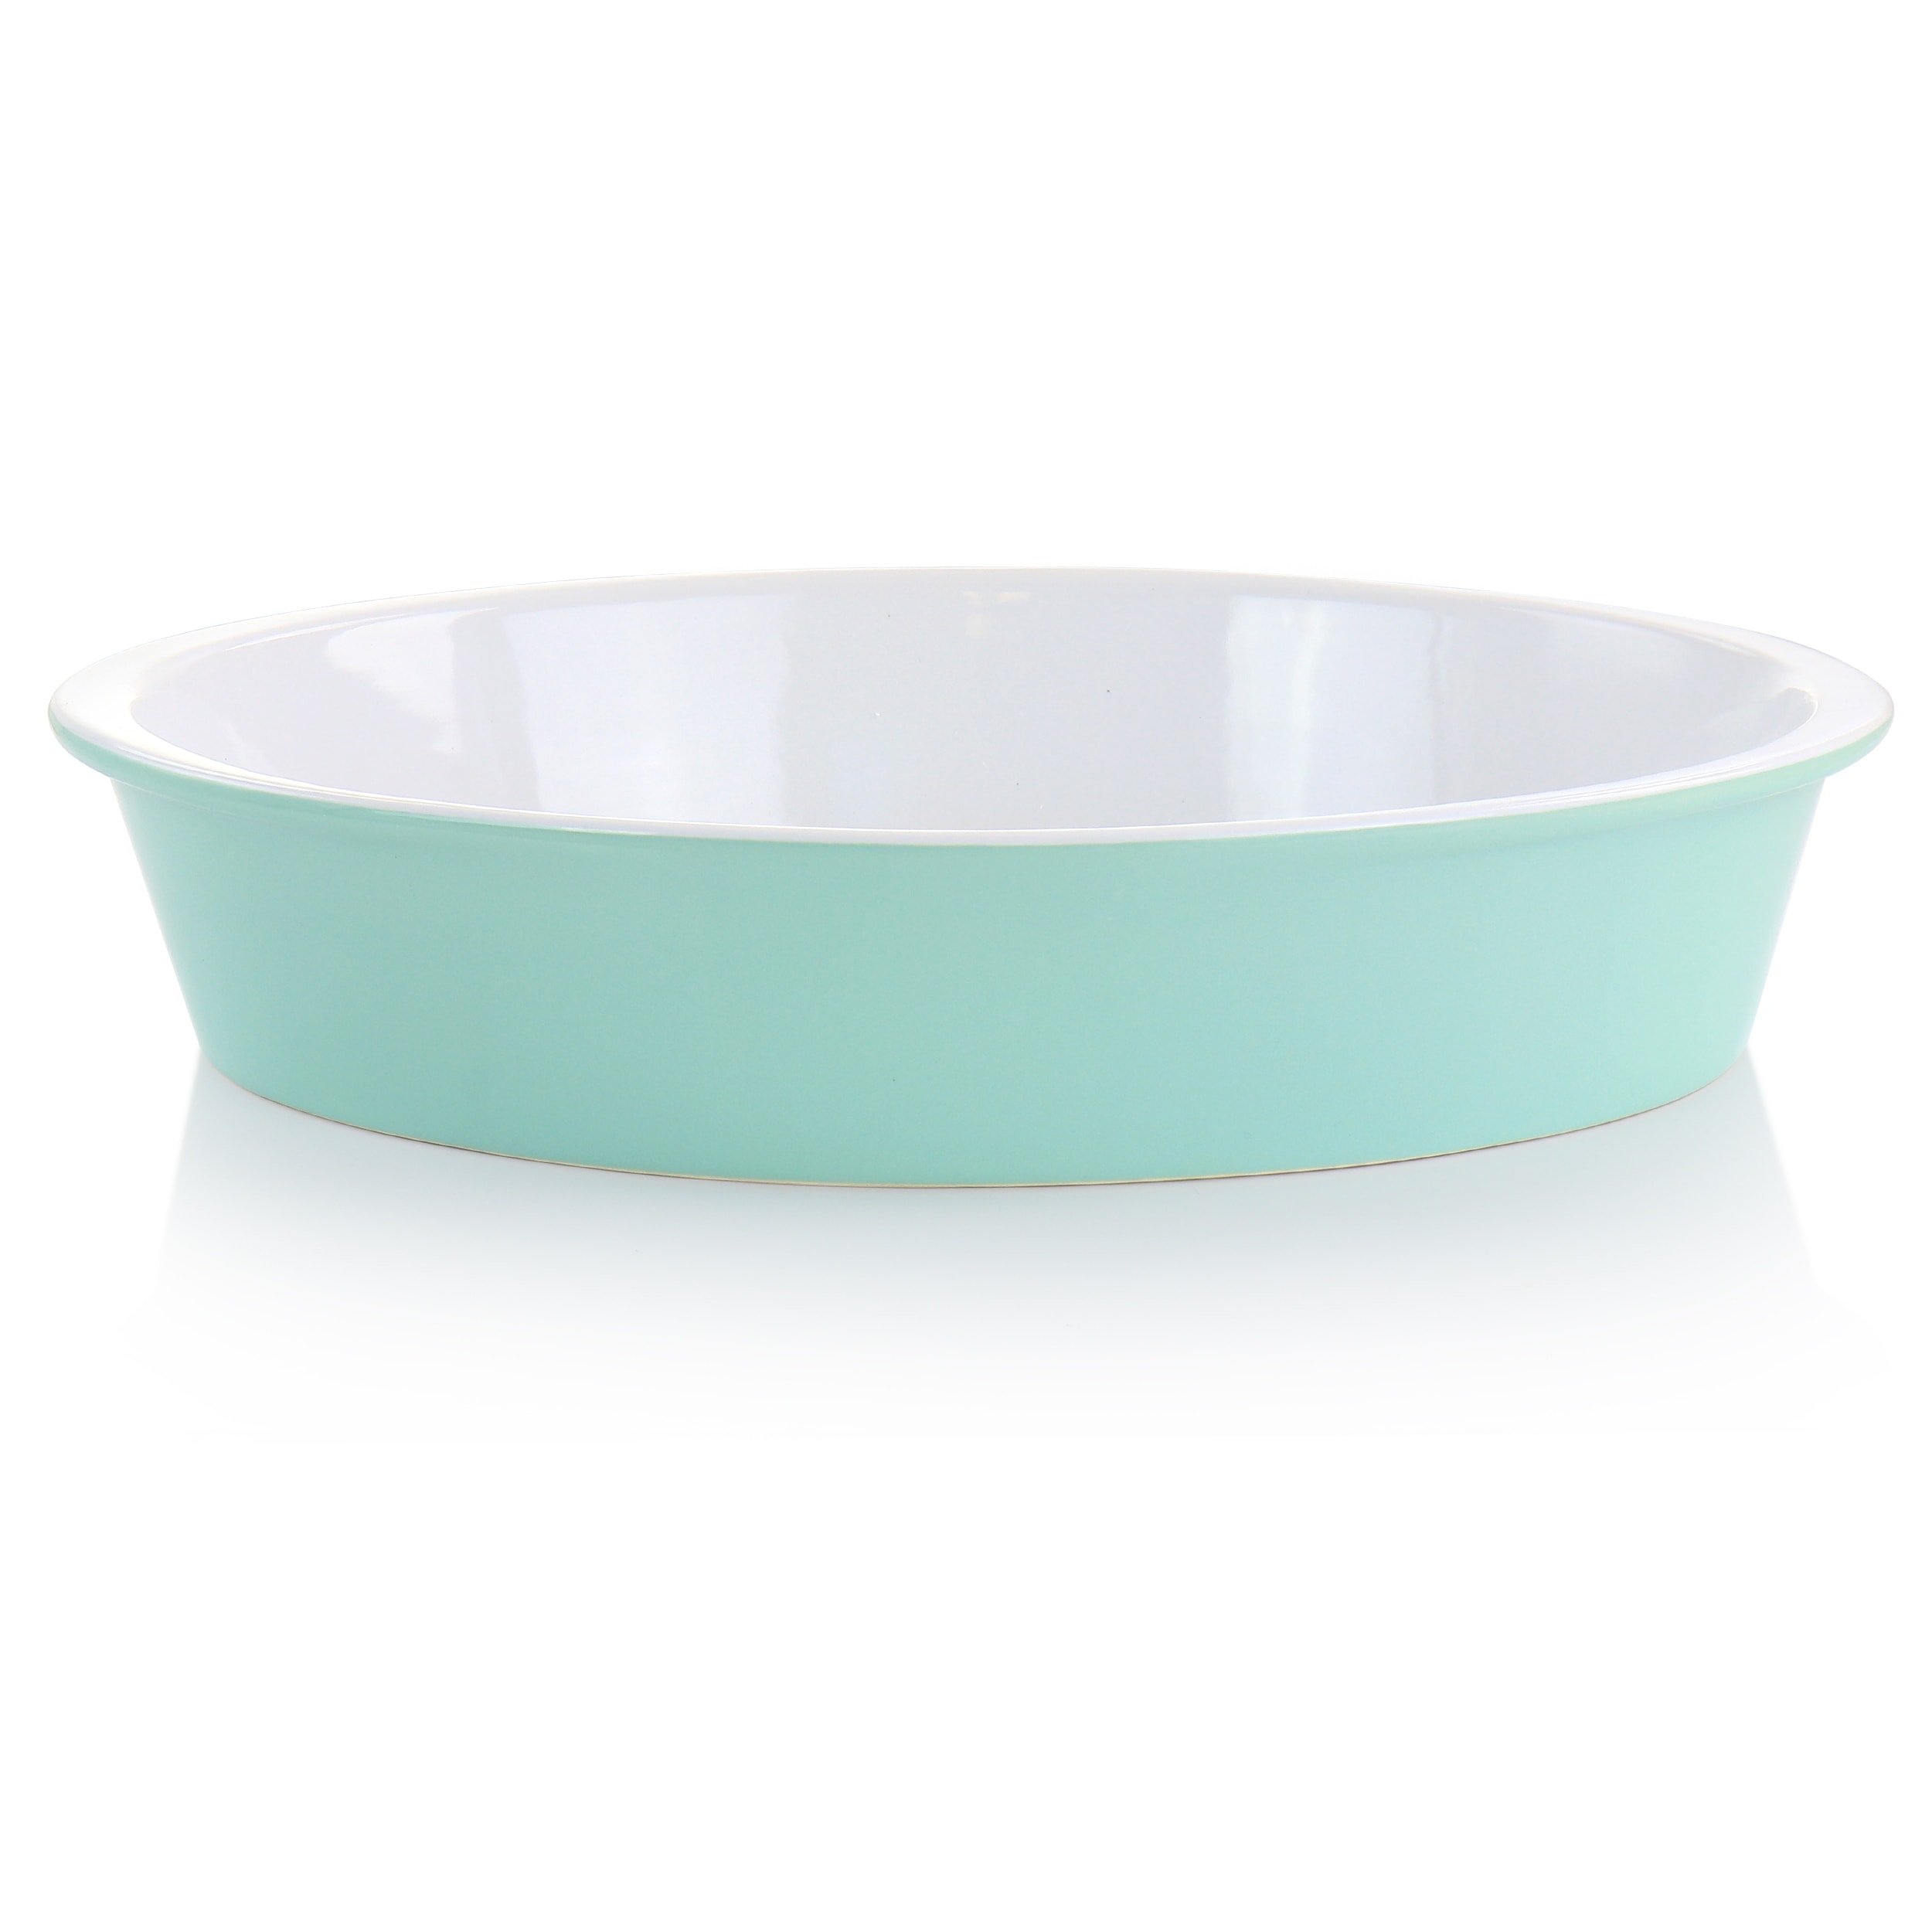 https://ak1.ostkcdn.com/images/products/is/images/direct/560070bc59ec5c45e55901e5f5338d00fa6d76a0/Martha-Stewart-13-Inch-x-9.5-Inch-Stoneware-Oval-Baker-in-Turquoise.jpg